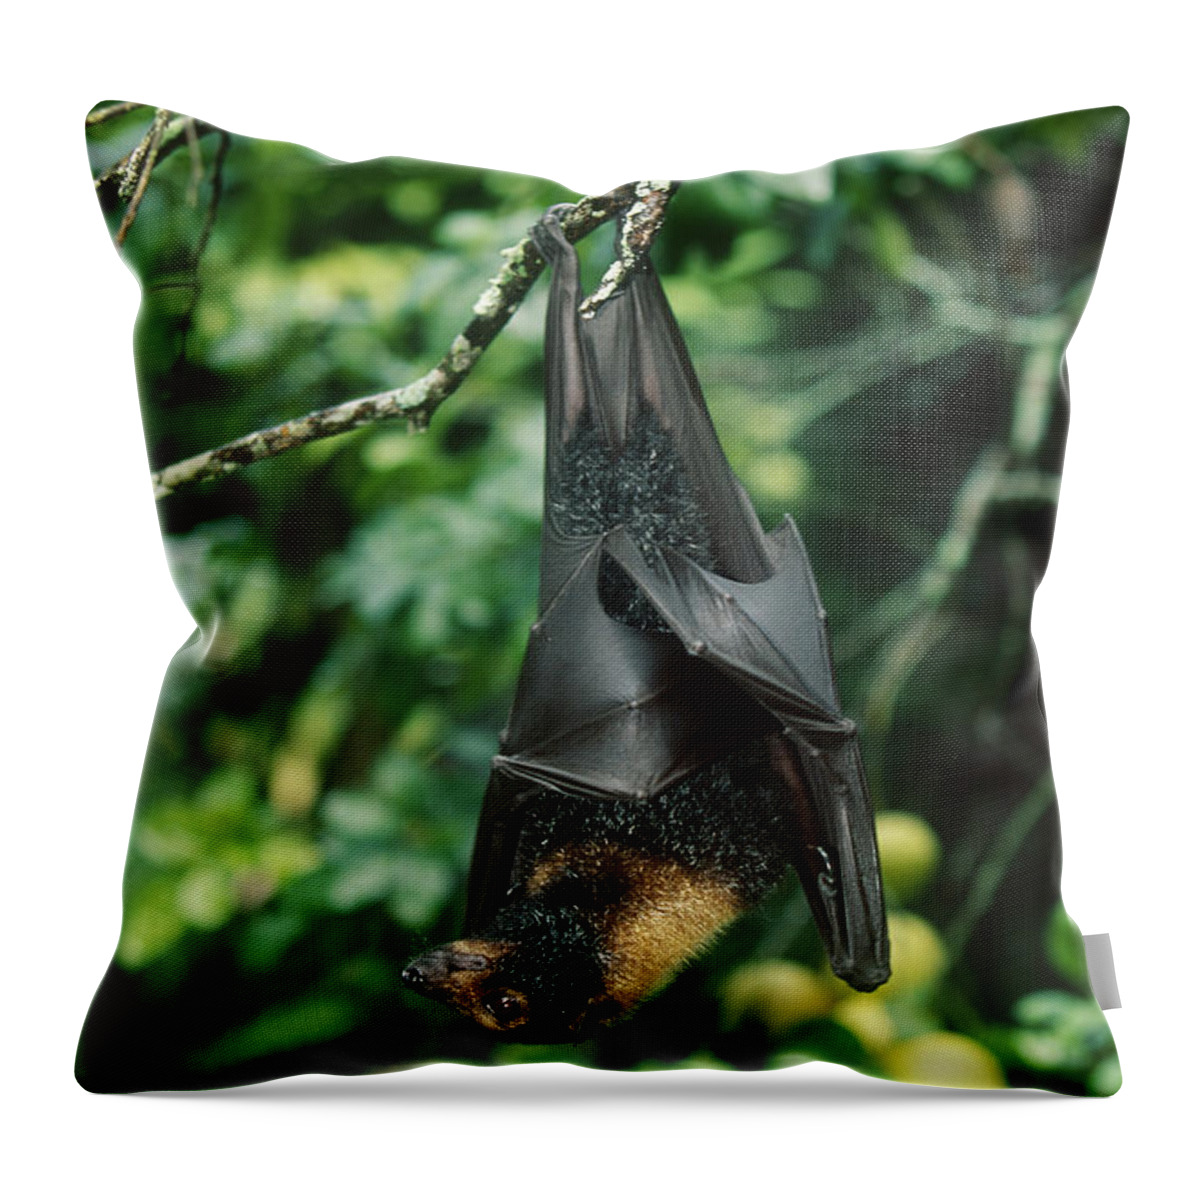 Animal Throw Pillow featuring the photograph Spectacled Flying Fox by David Hosking